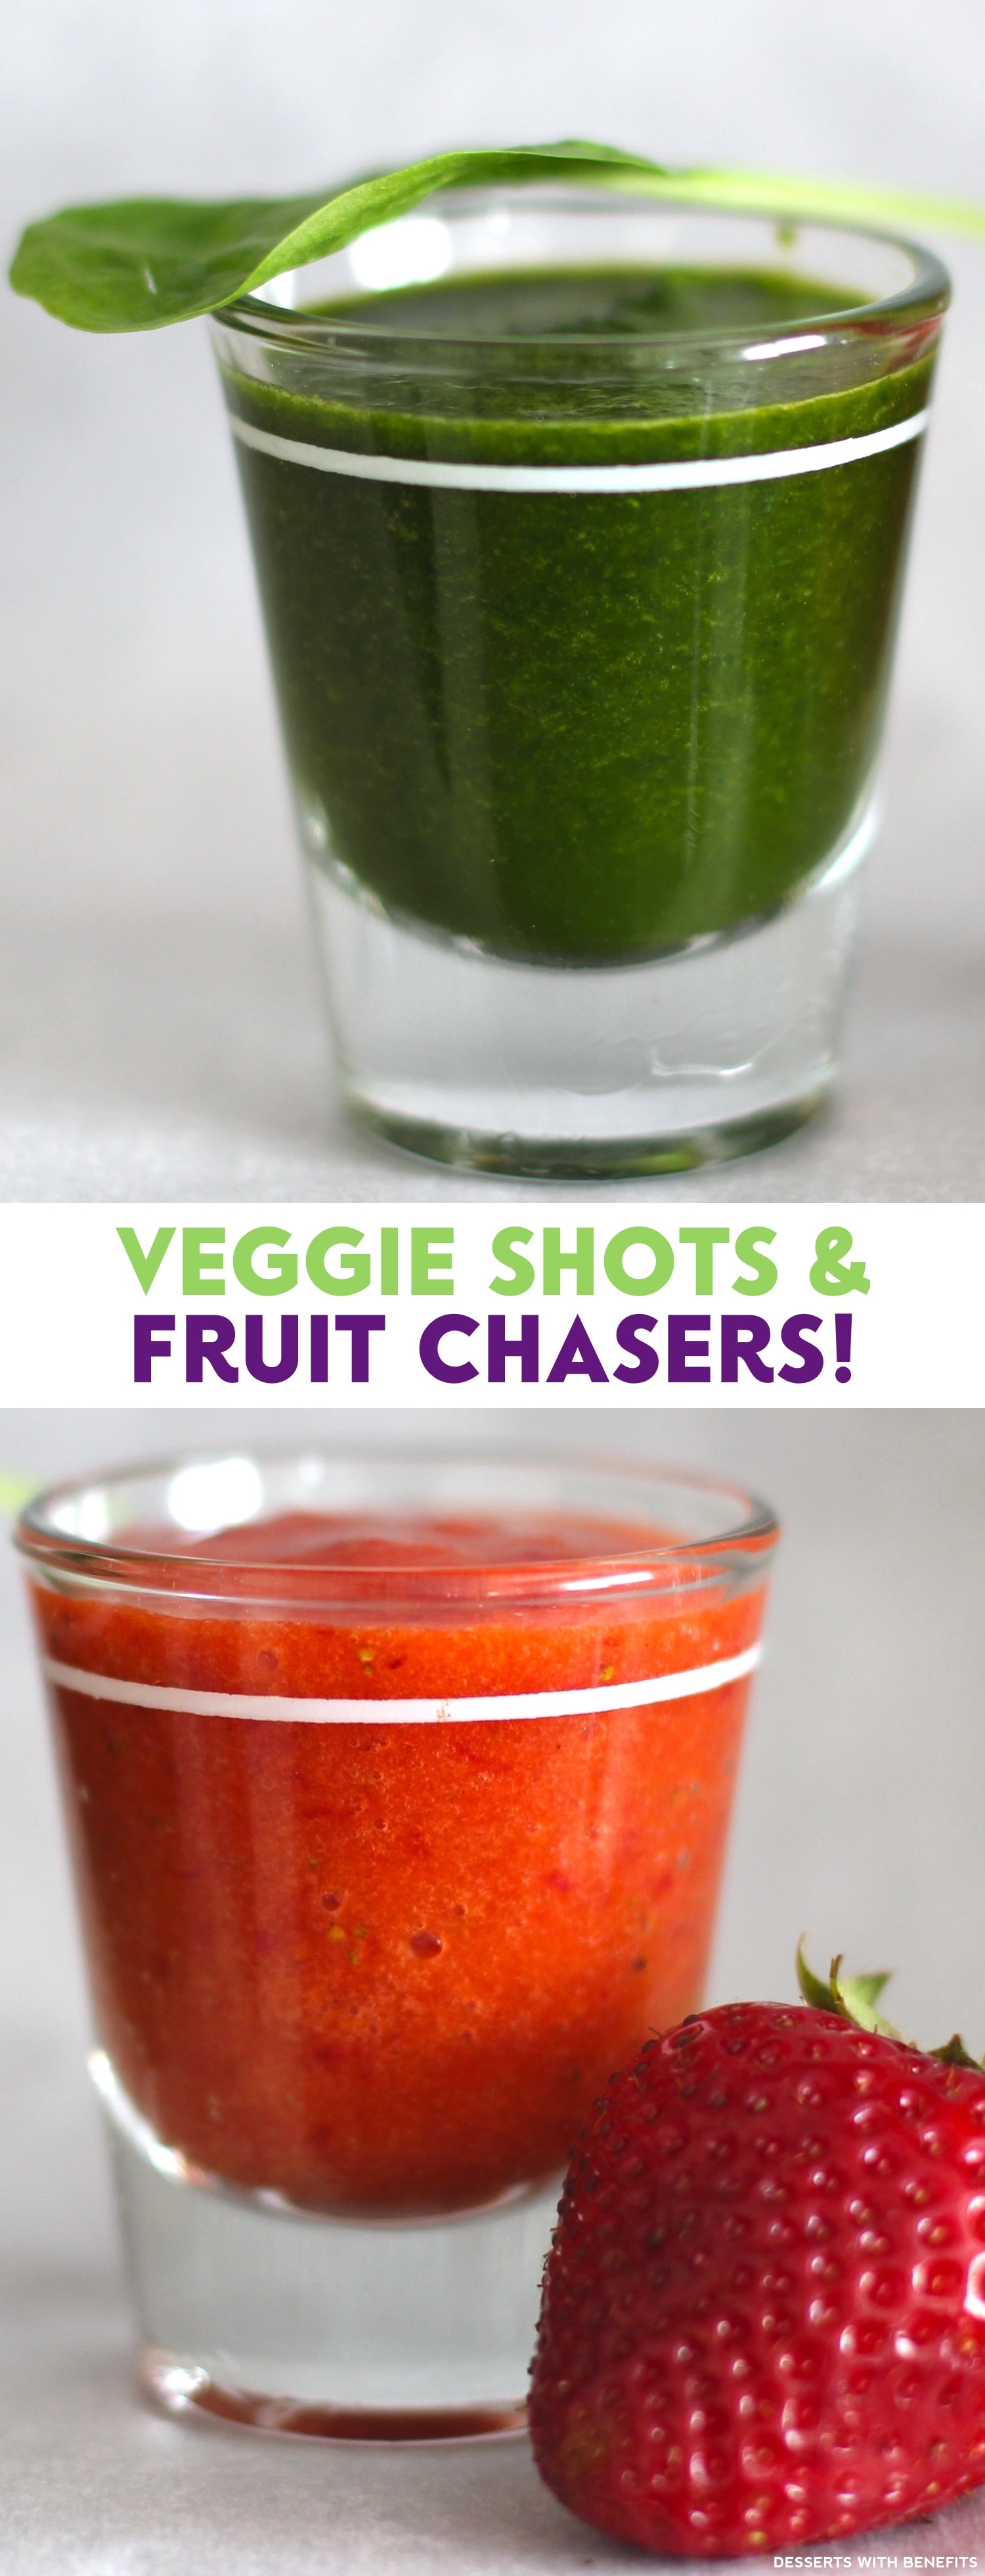 Healthy Veggie Shots and Fruit Chasers - Desserts With Benefits